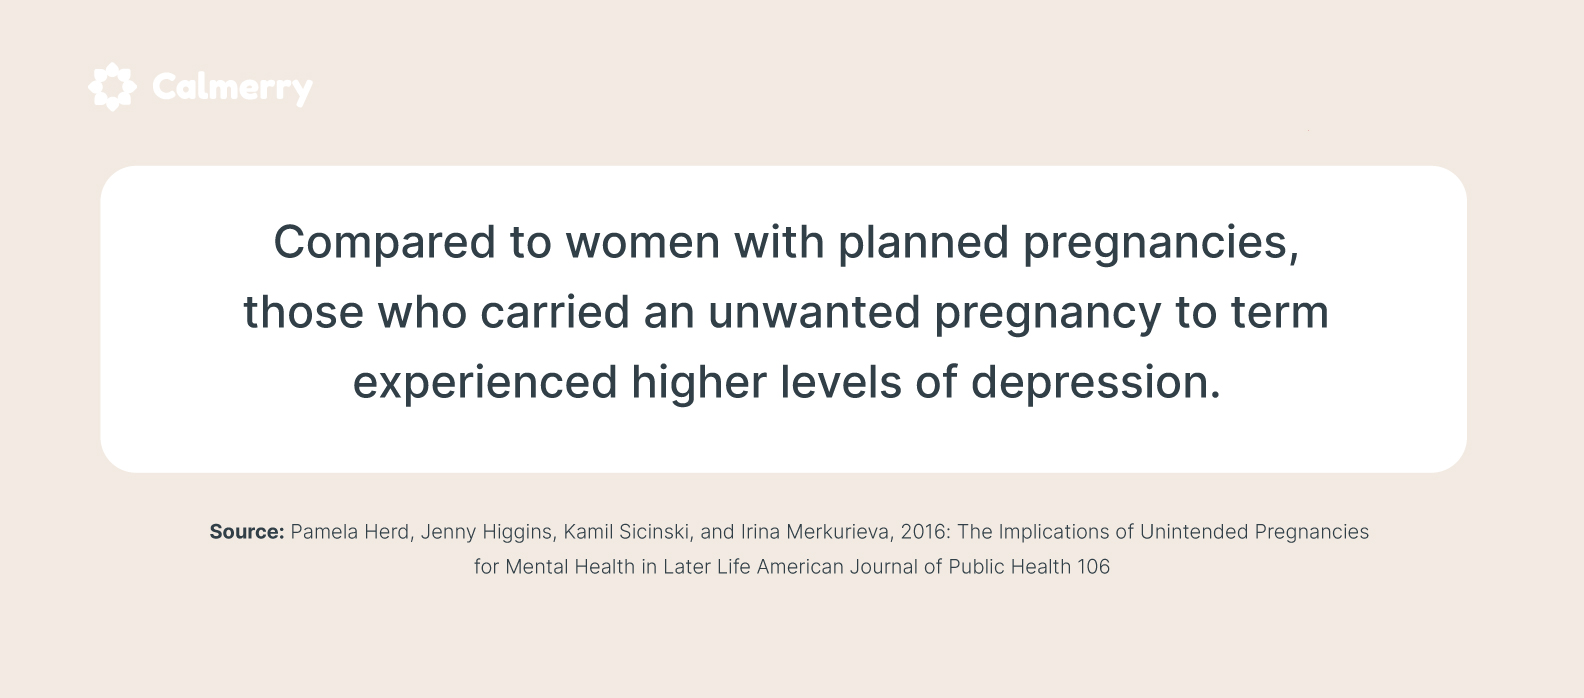 those who had carried an unwanted pregnancy to term were significantly more likely to experience depression